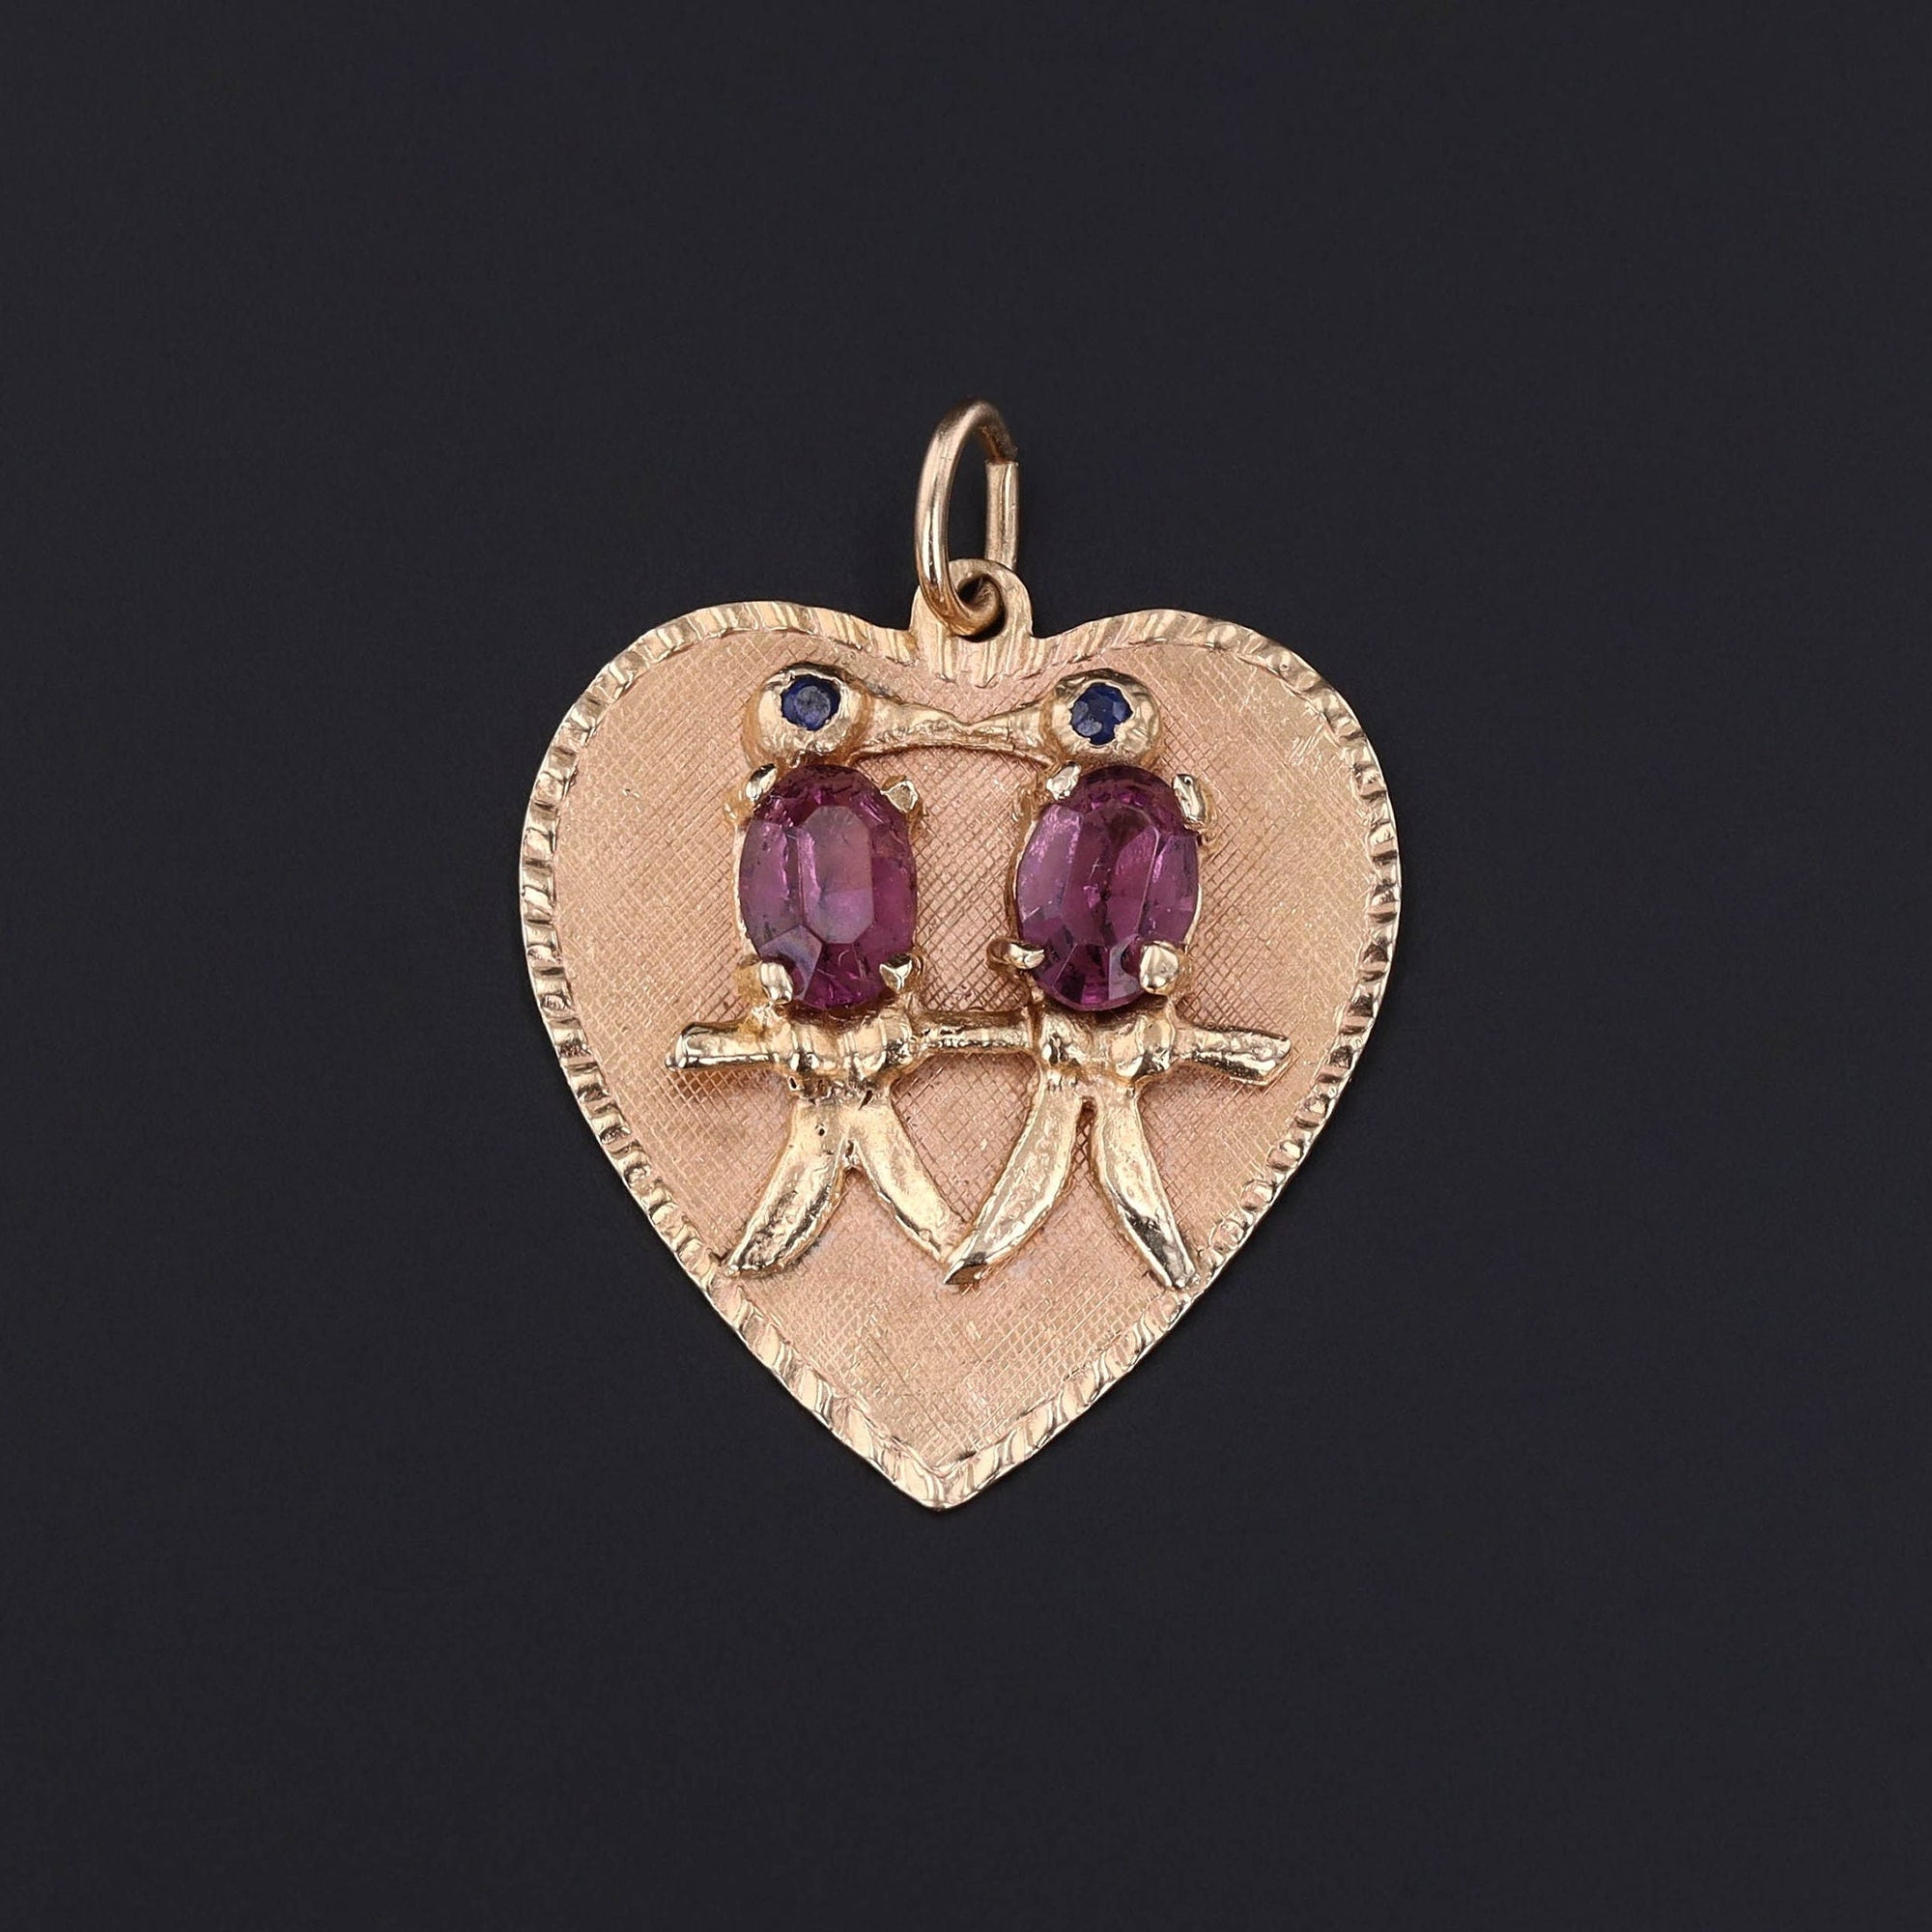 Vintage Lovebirds with Purple Glass and Sapphires Pendant of 14k Gold